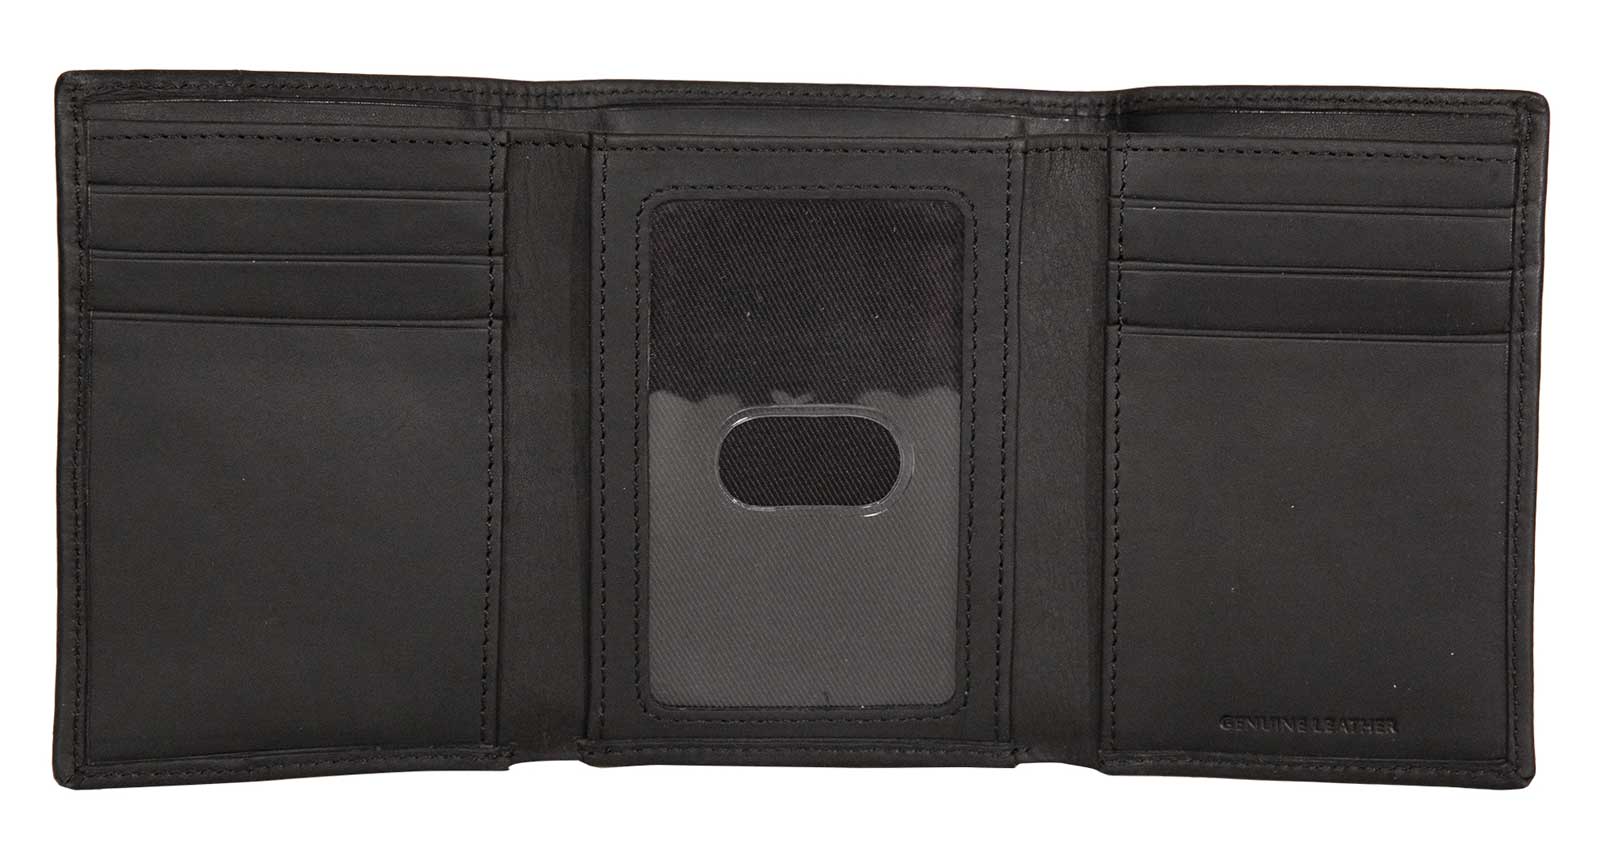 Ford Mustang Vintage Top Grain Black Leathertrifold Wallet 